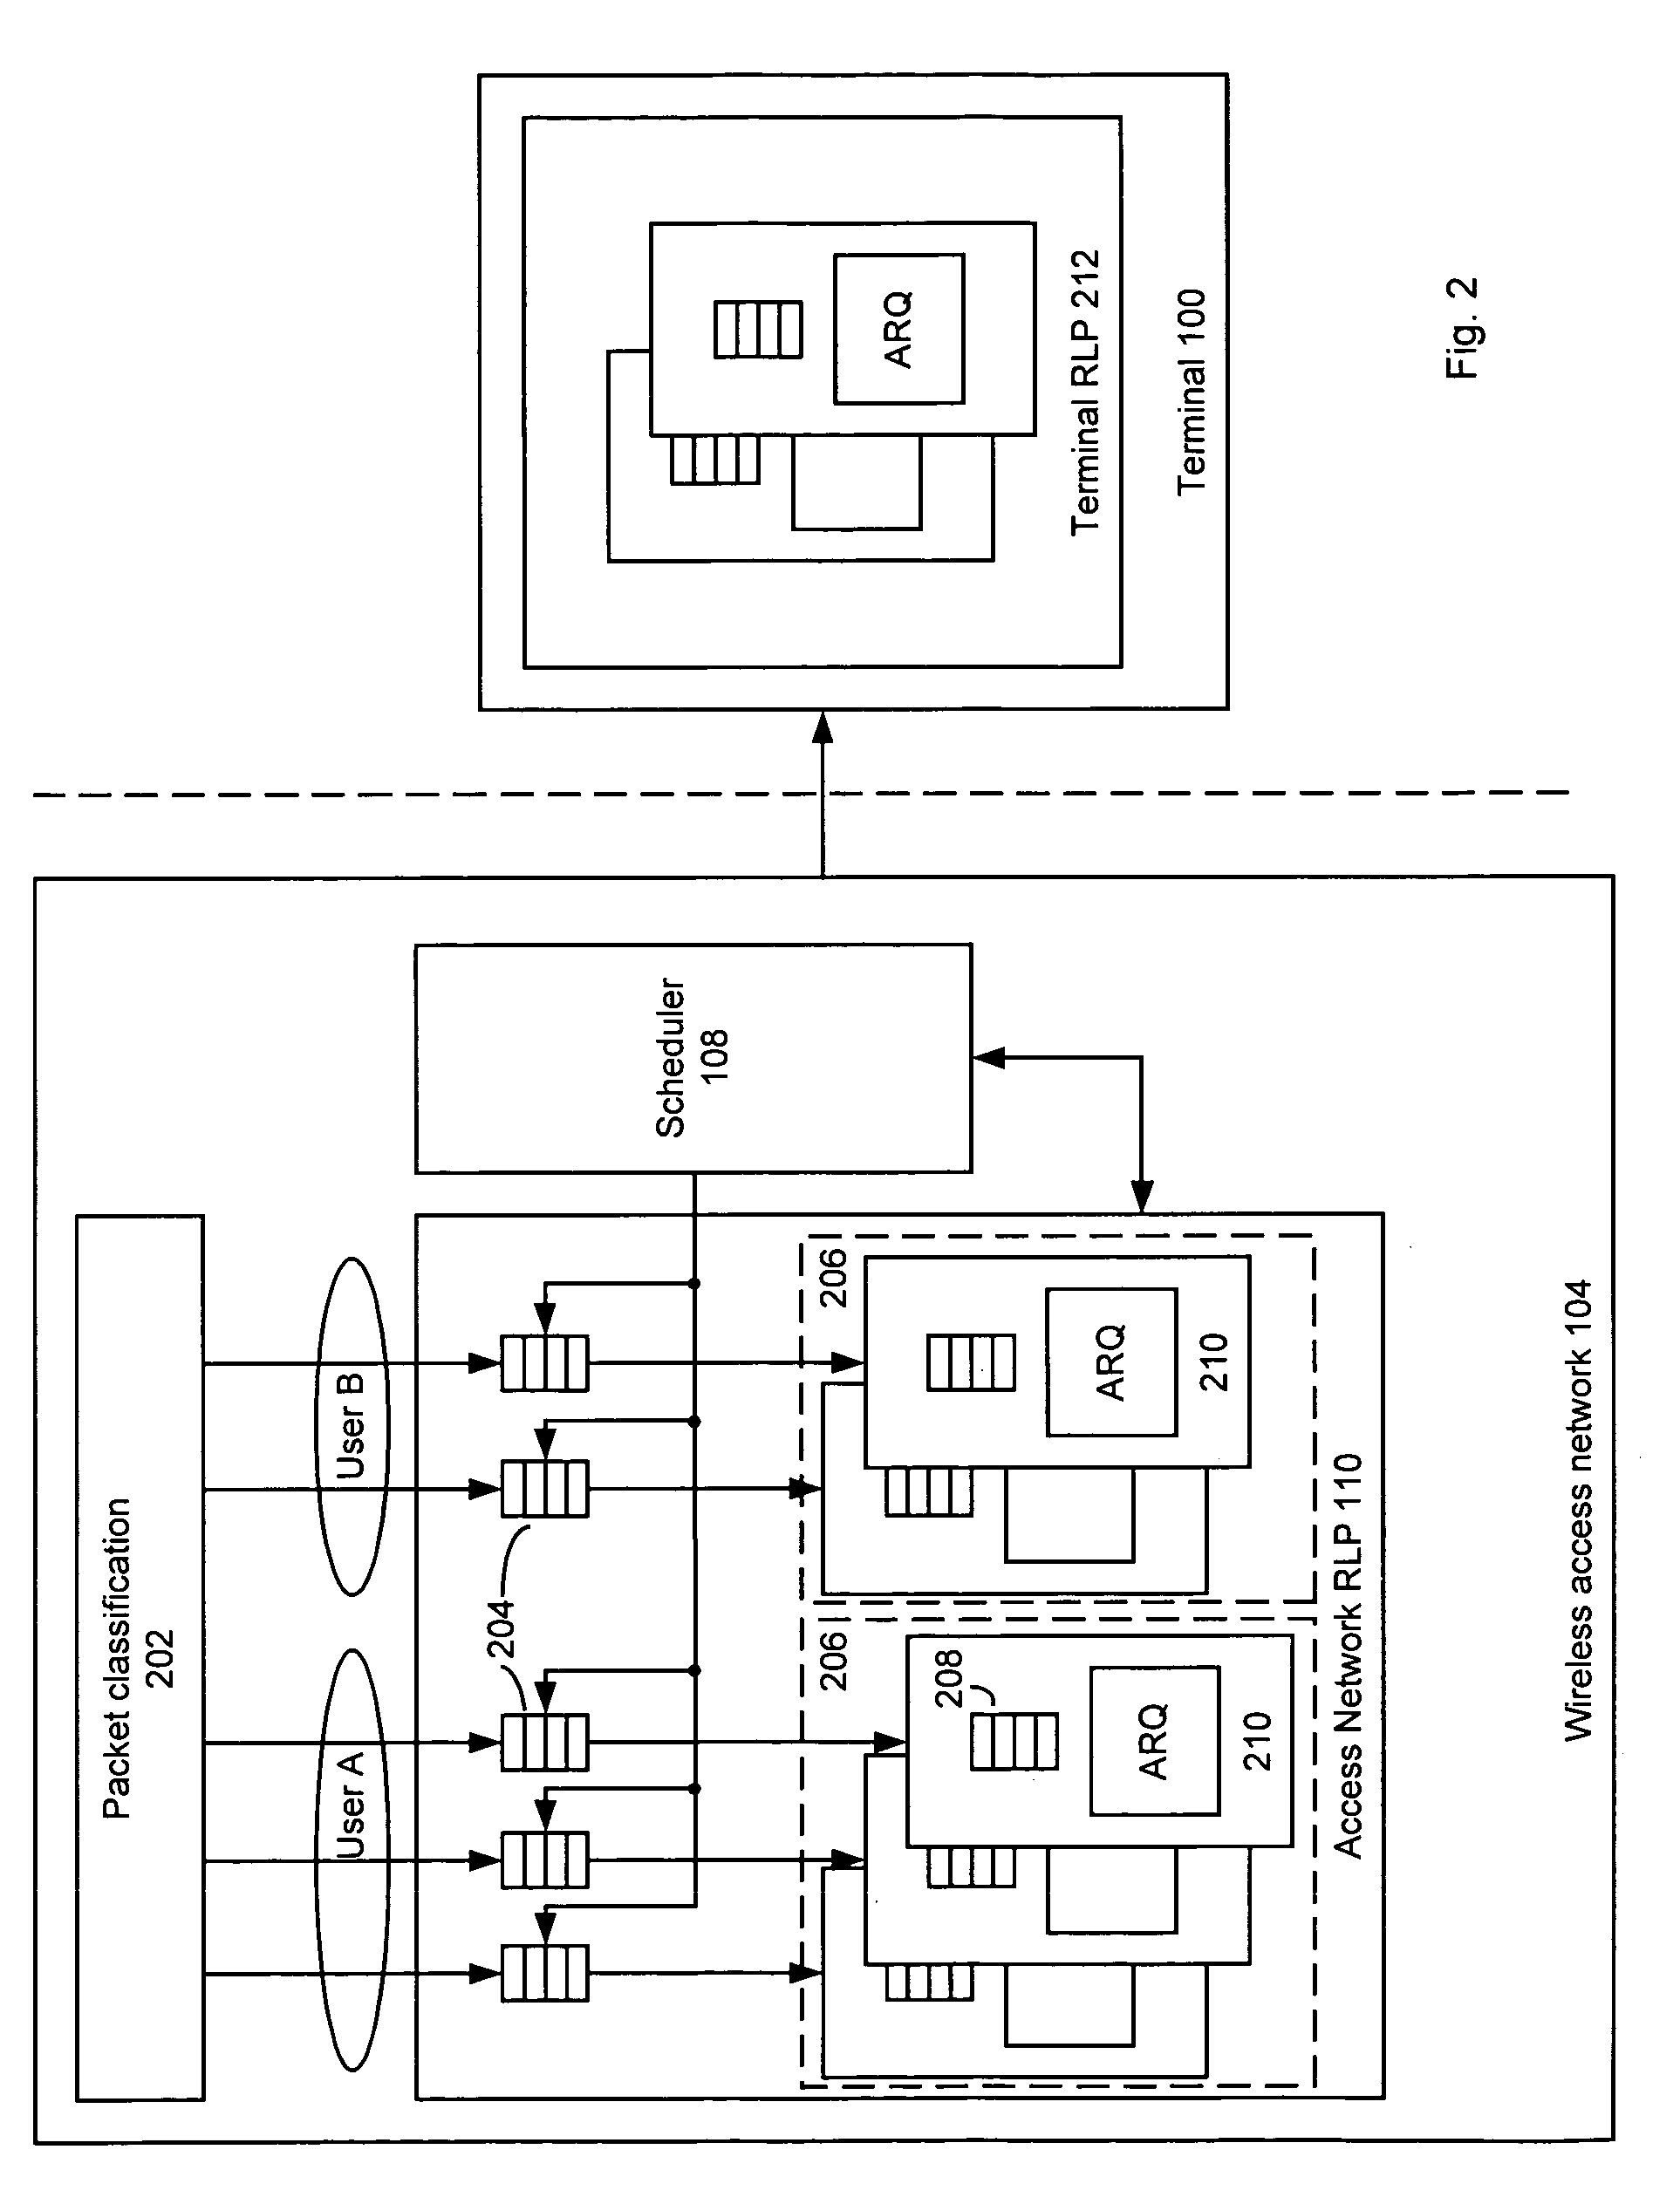 Dynamic automatic retransmission request in wireless access networks